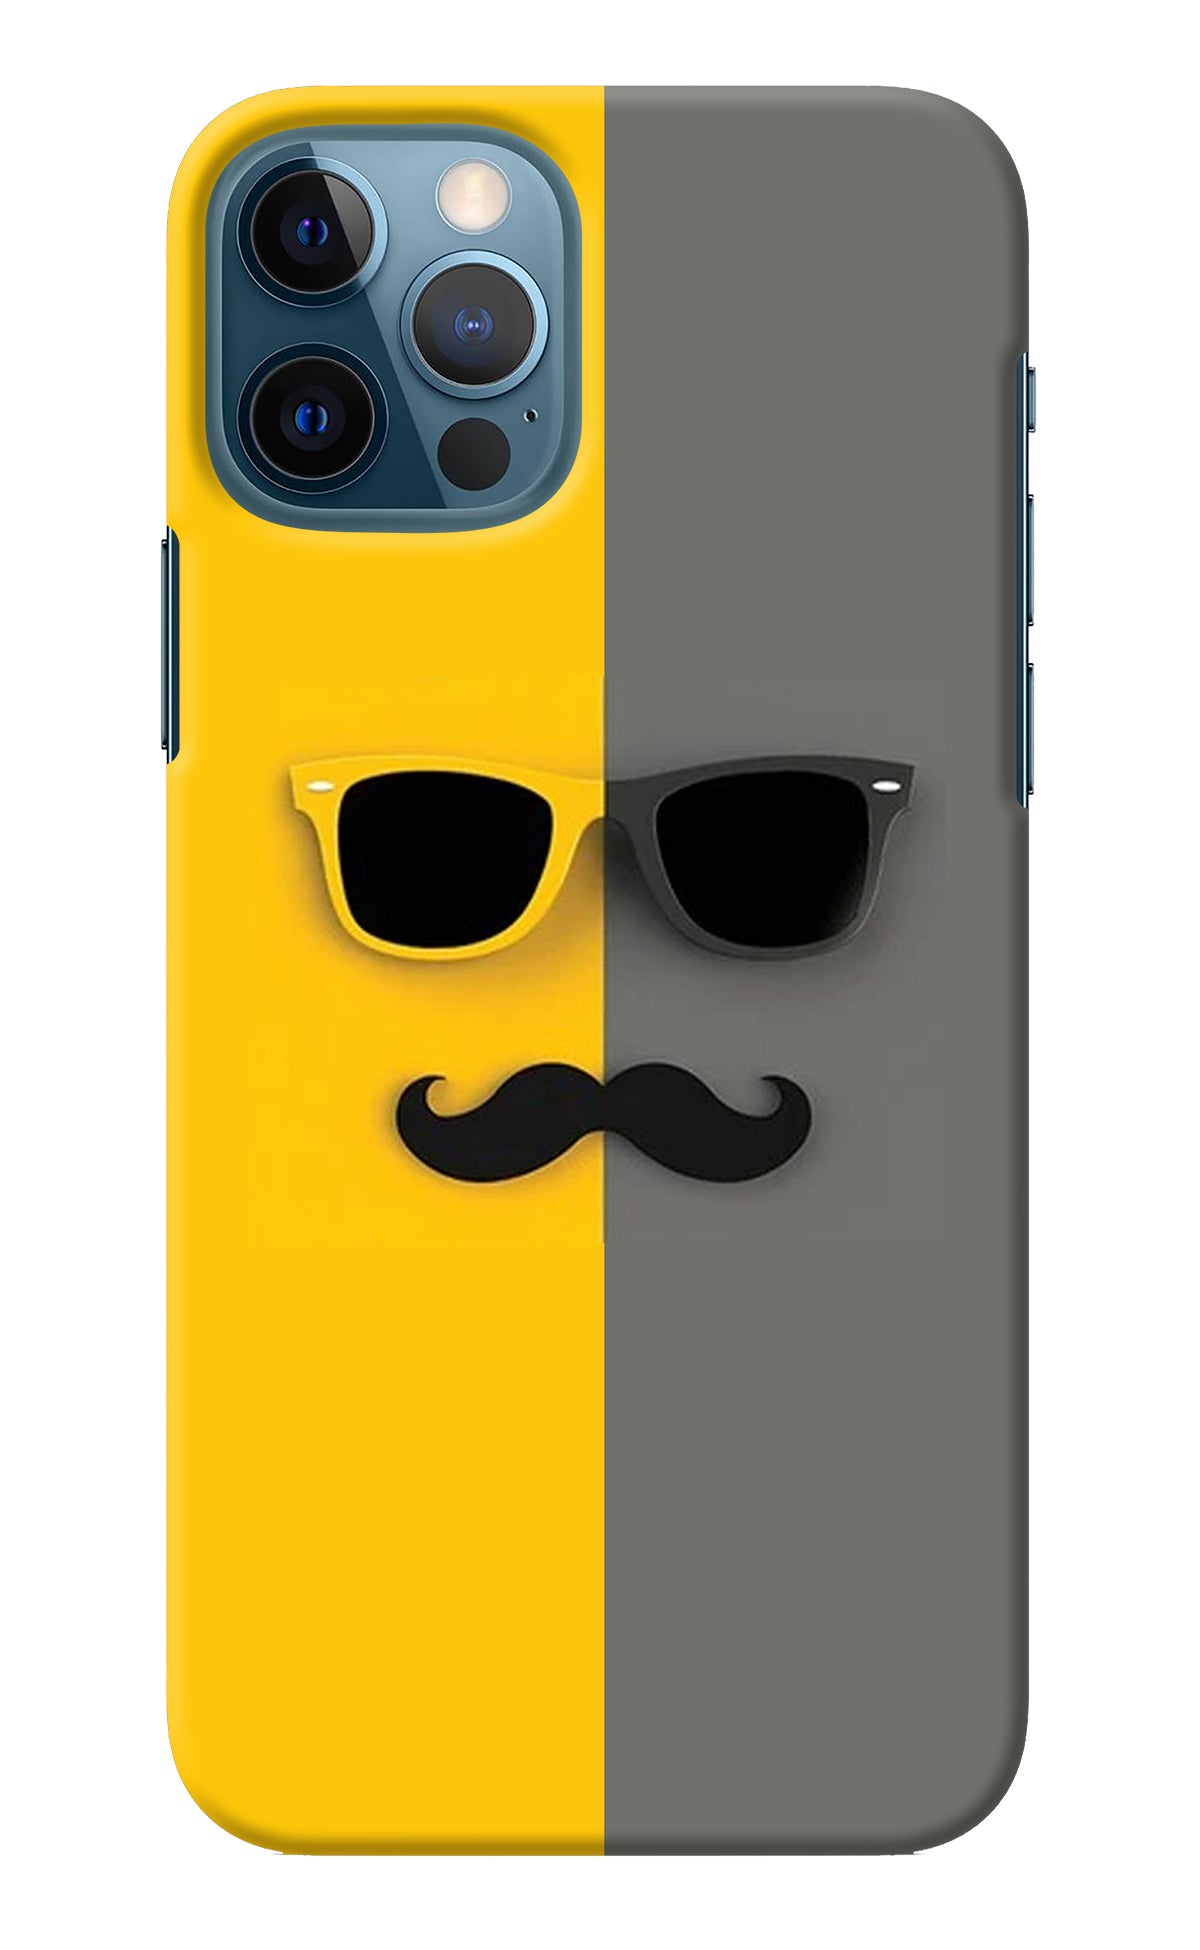 Sunglasses with Mustache iPhone 12 Pro Back Cover